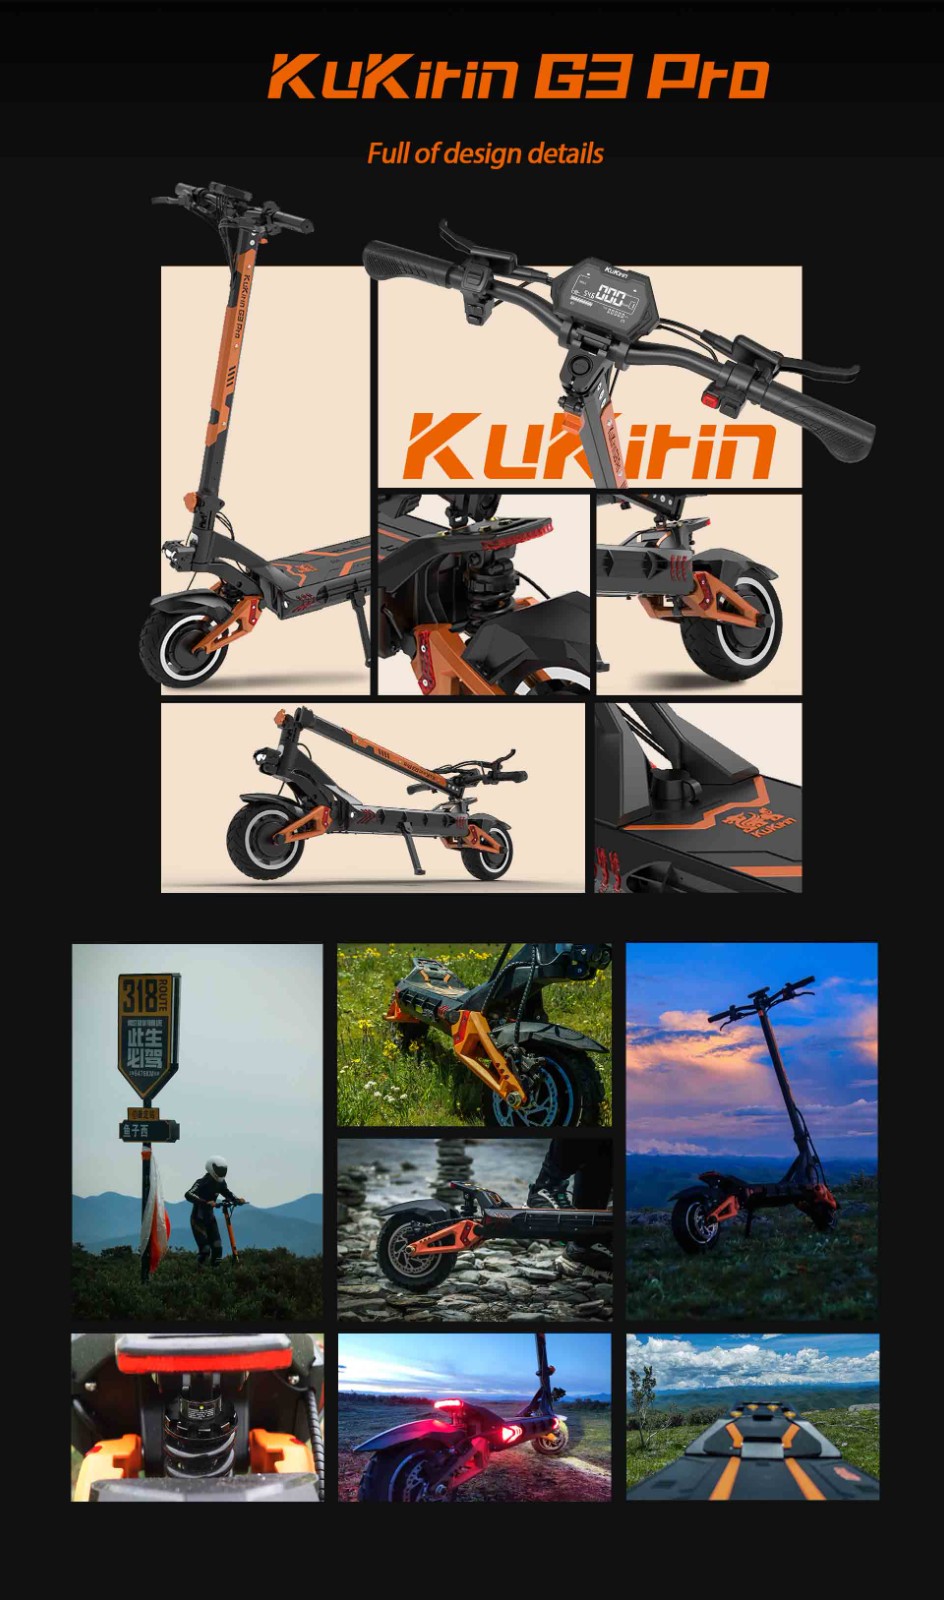 KuKirin G3 Pro 1200W*2 Motors Off-Road Electric Scooter 10 Inch Tires, 52V 23.2Ah Removable Battery, 80KM Top Range, 65Km/h Max Speed, Double Shock Absorber, IP54 Waterproof, Double Oil Brakes